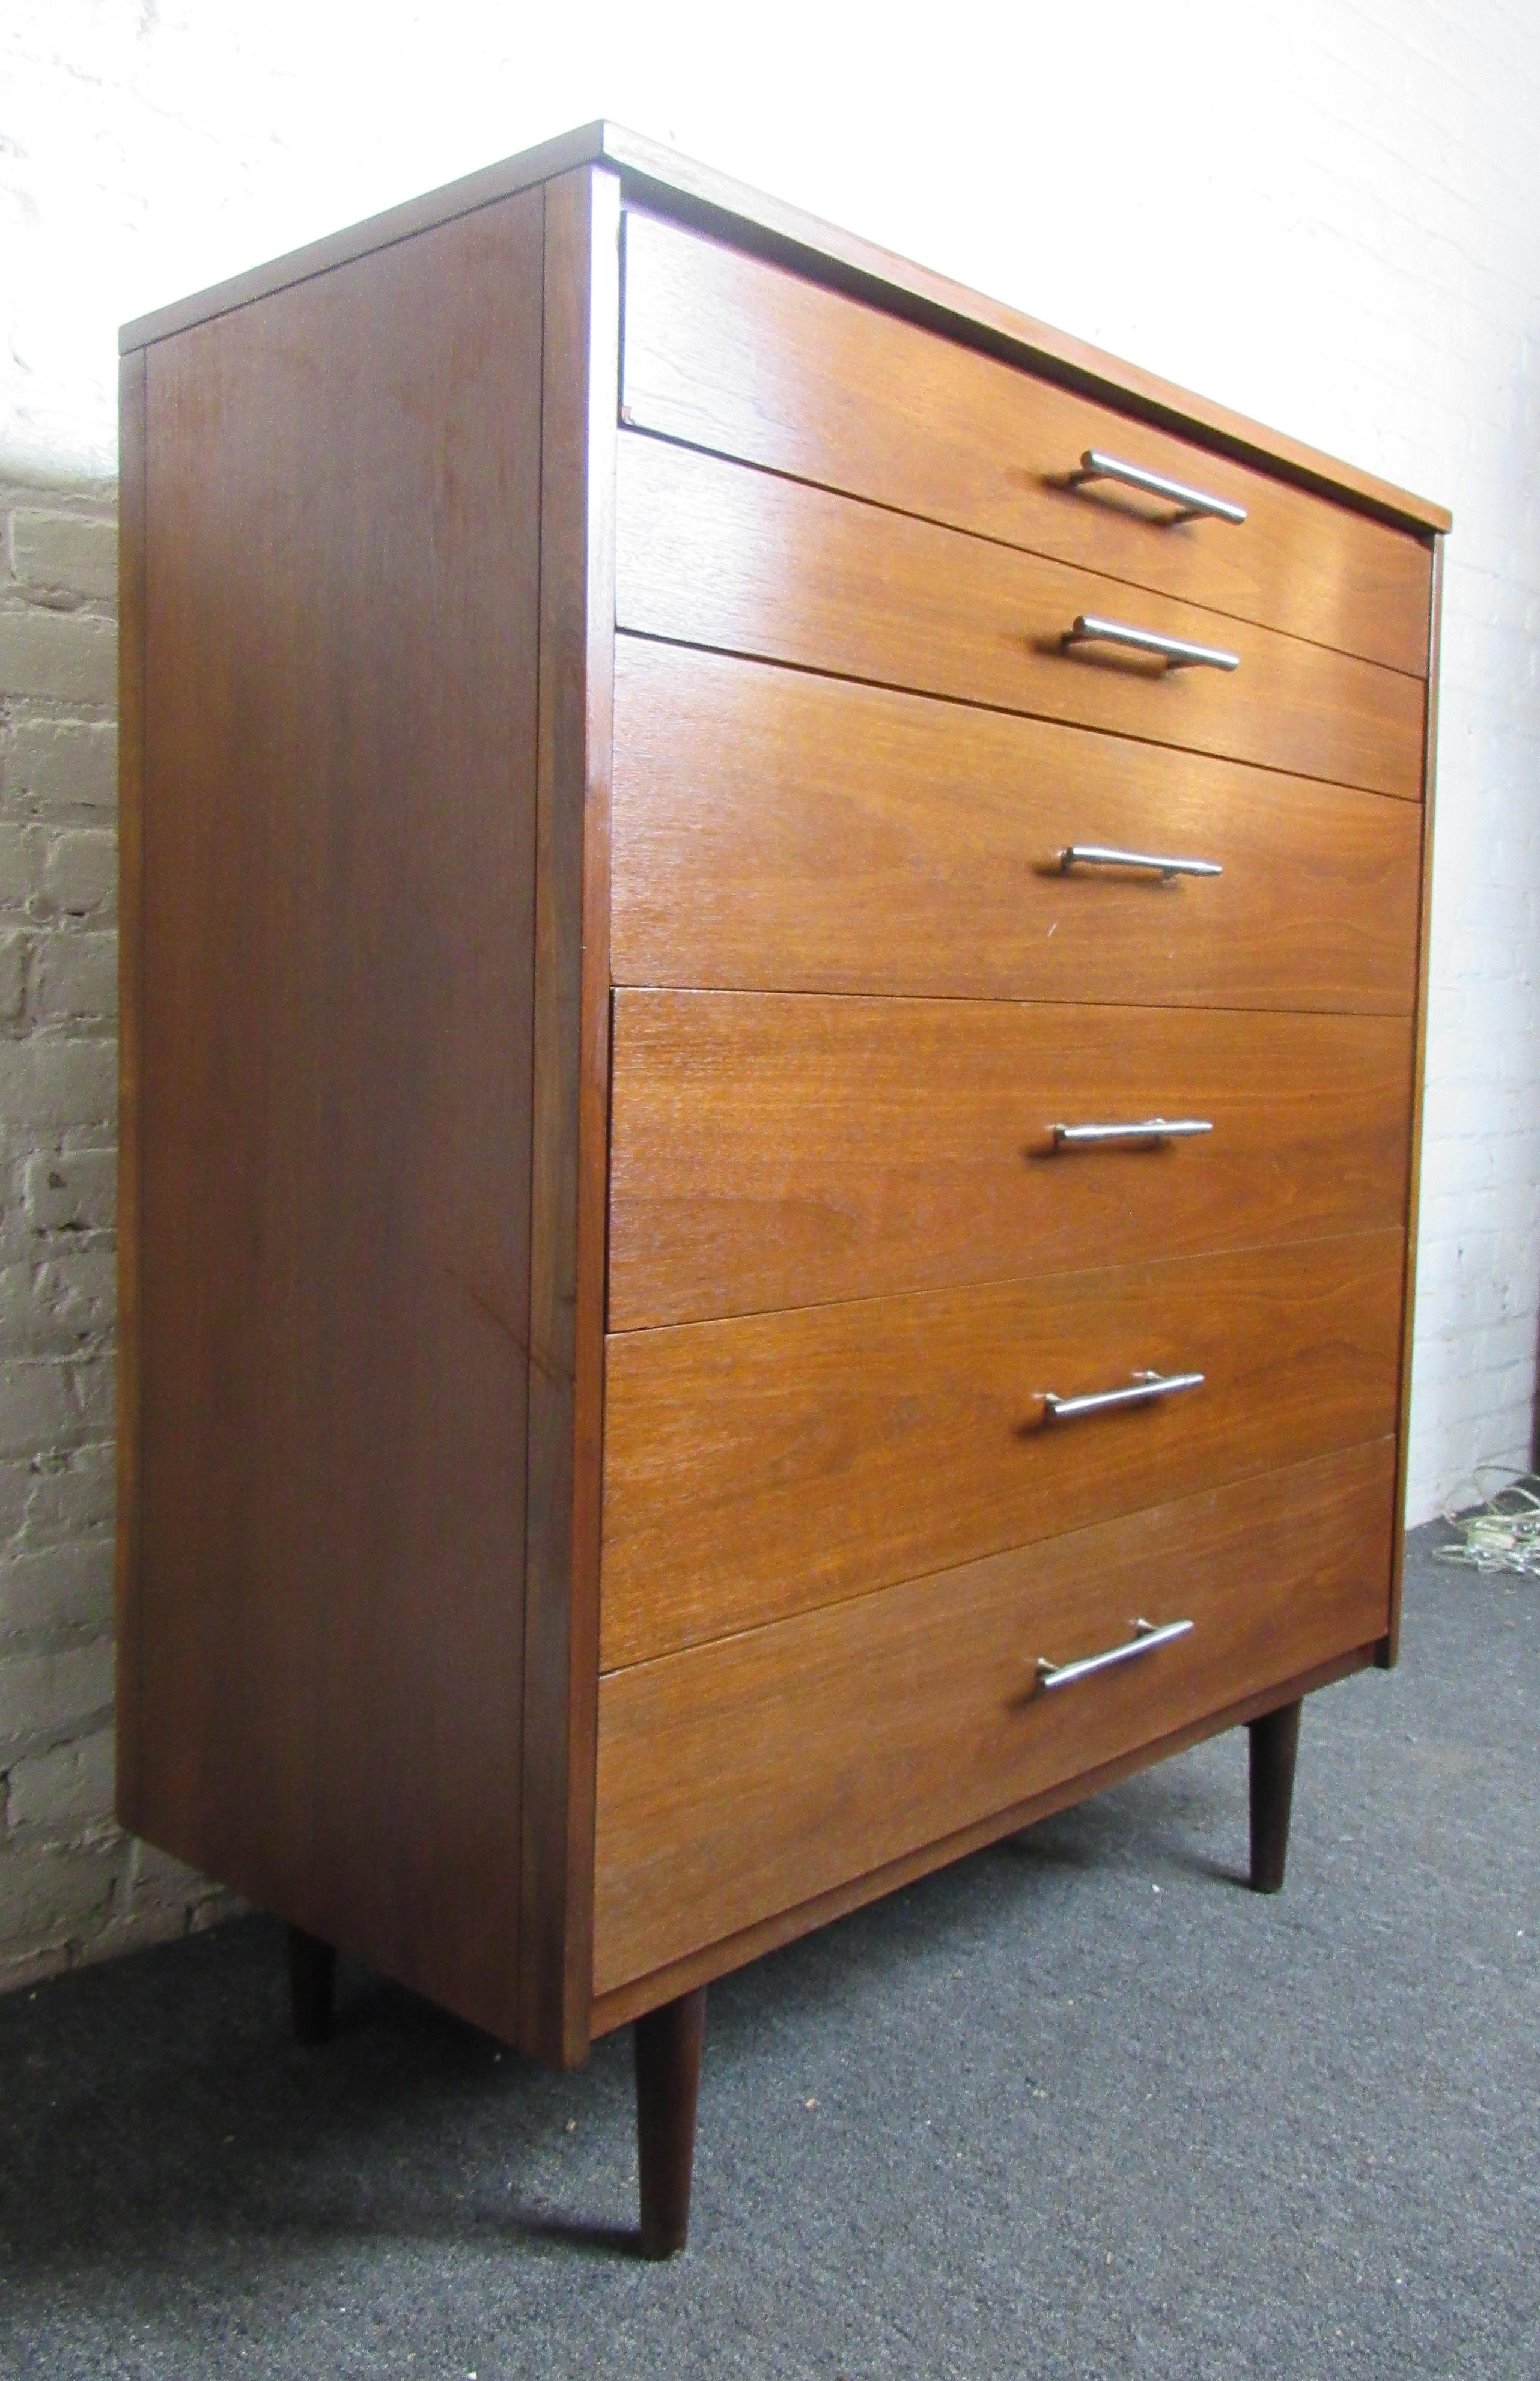 Tall high boy dresser with chrome handles. Walnut grain and tapered legs.

(Please confirm item location - NY or NJ - with dealer).
 